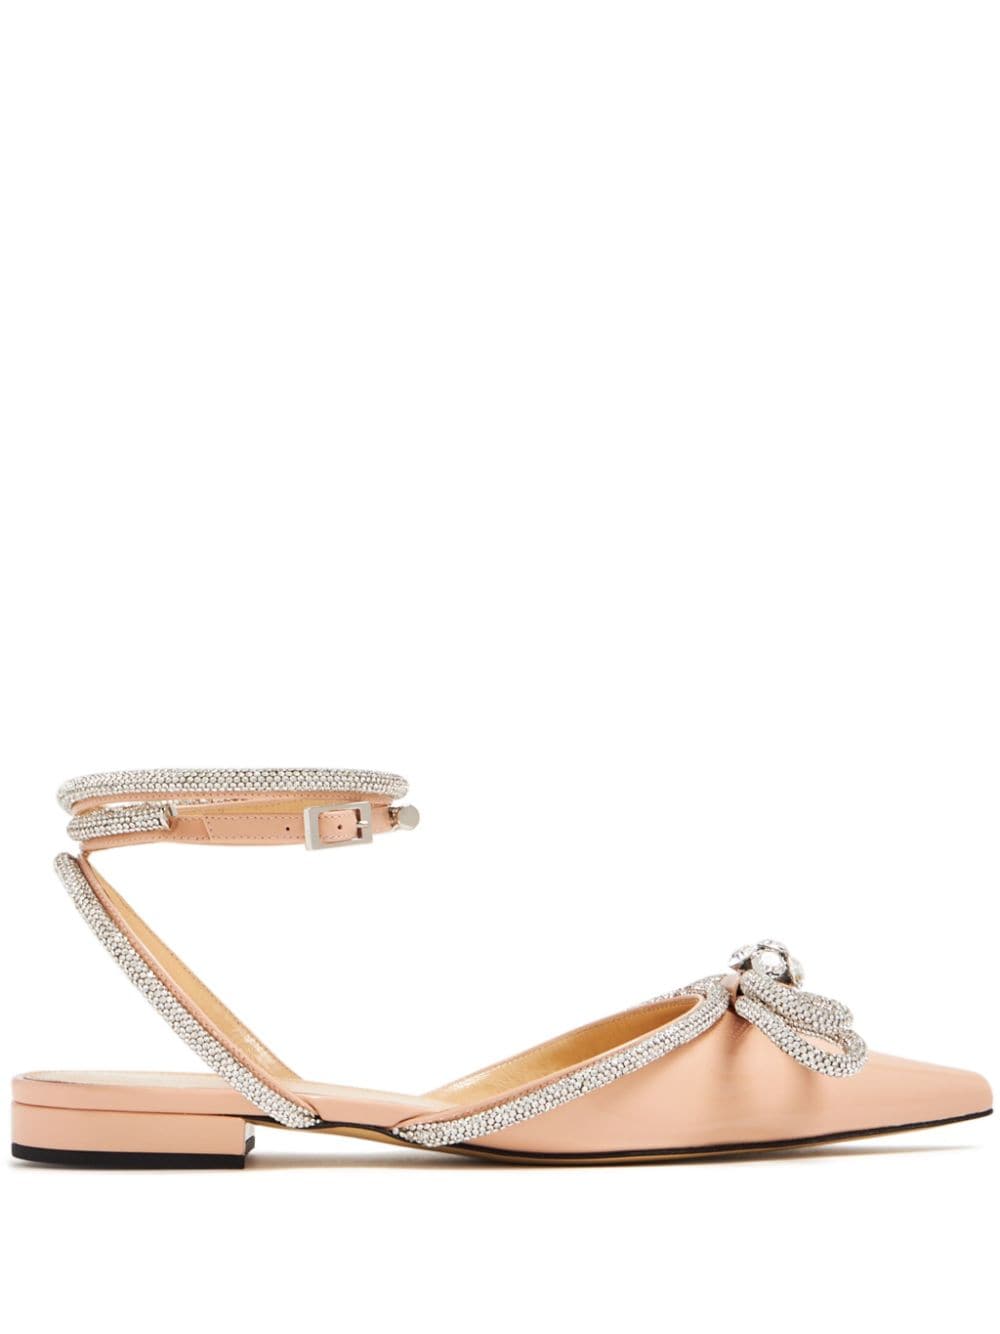 Image 1 of MACH & MACH Double Bow flat sandals